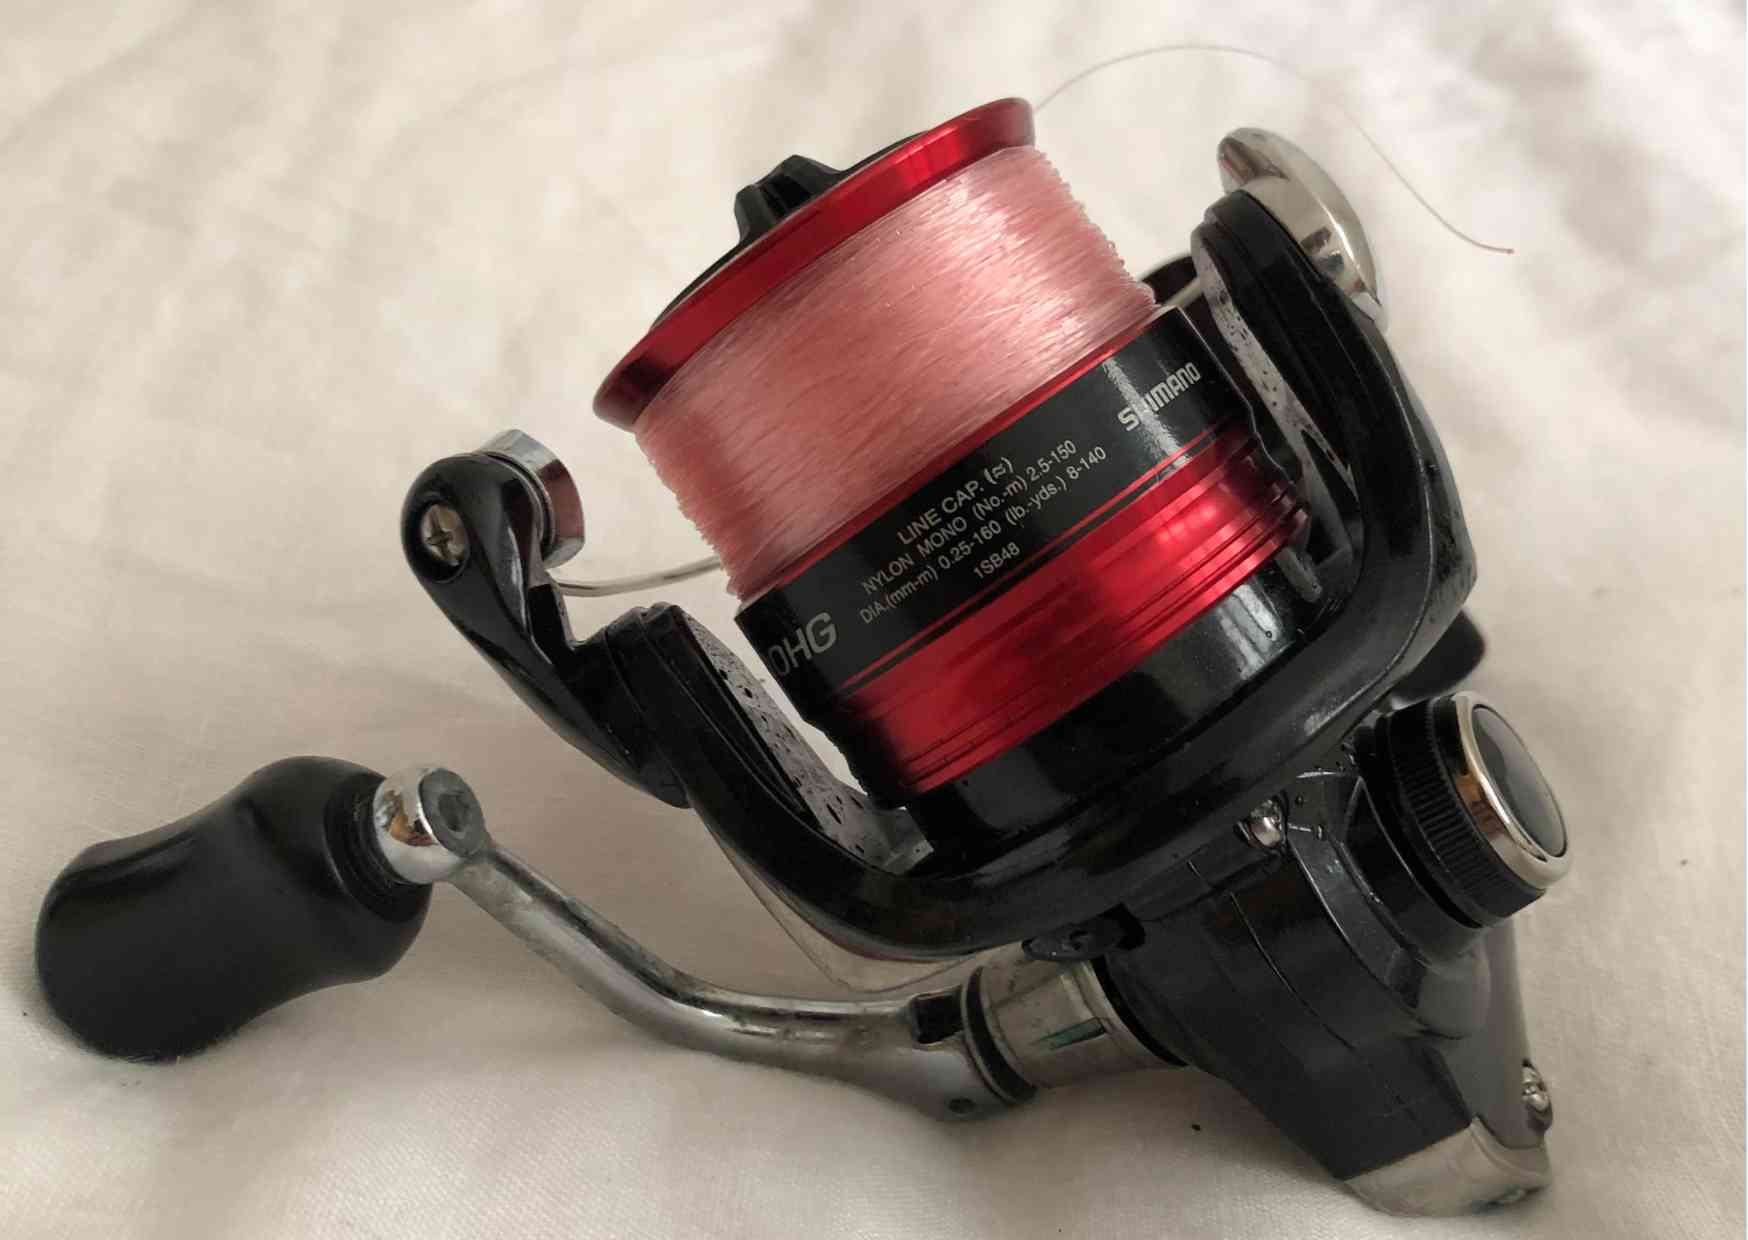 Photo of Shimano Sienna by the Author